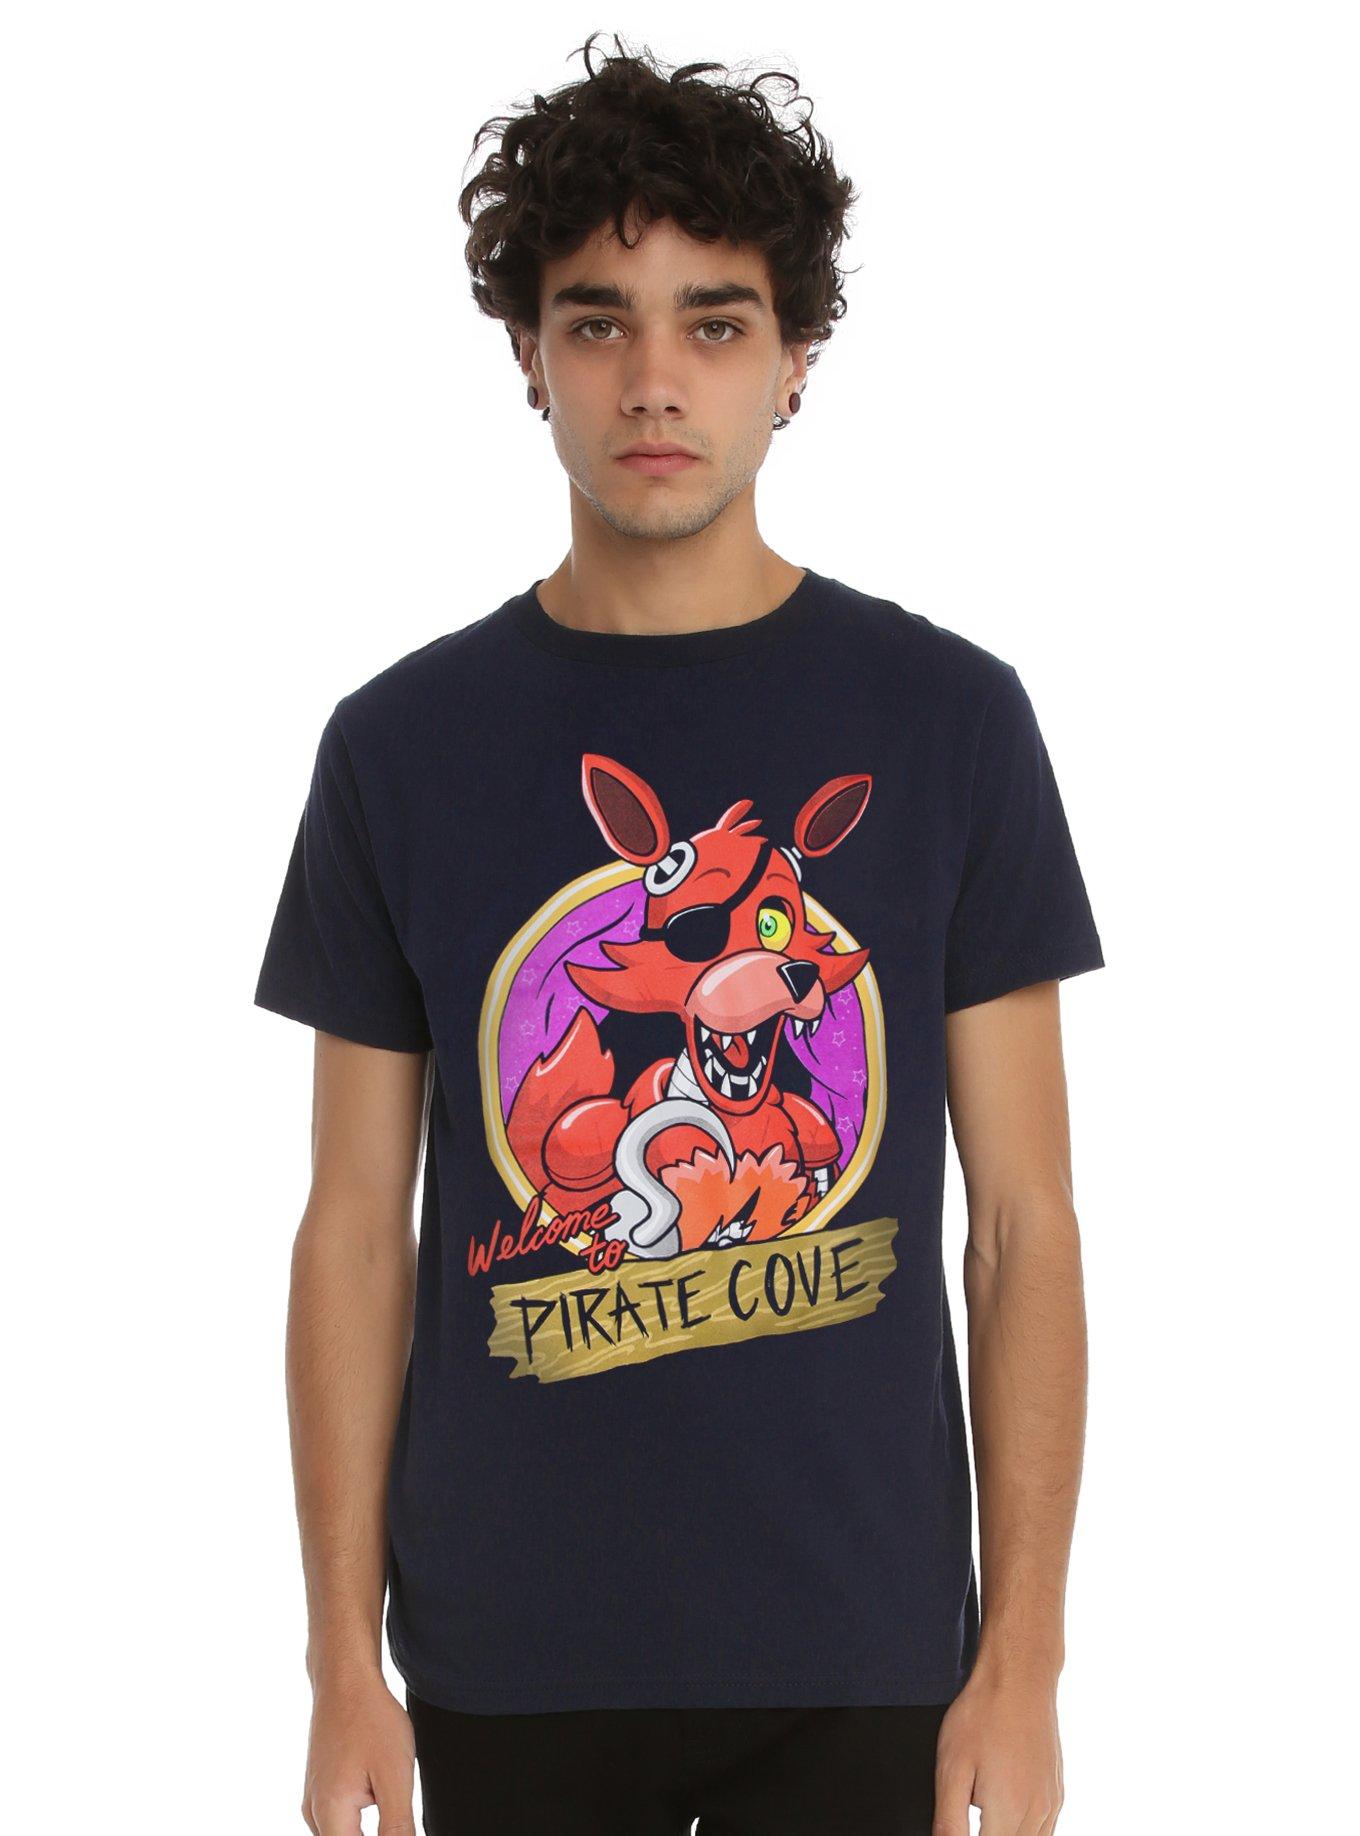 Five Nights At Freddy's Welcome To Pirate Cove T-Shirt | Hot Topic